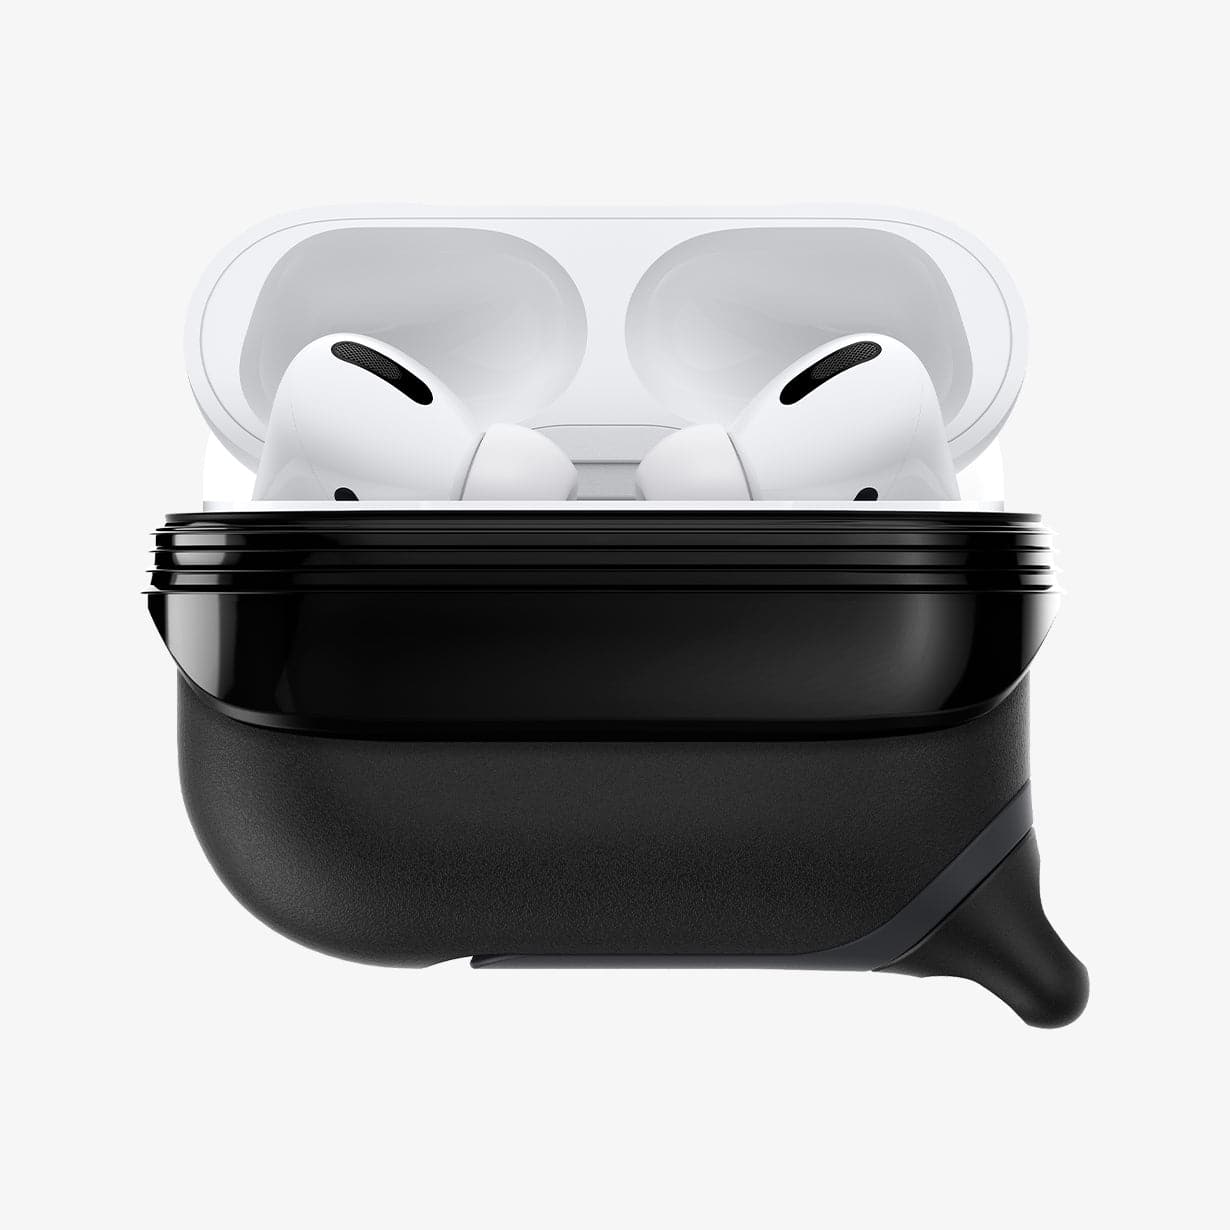 ASD00542 - Apple AirPods Pro / AirPods Pro 2 Case Slim Armor IP in black showing the front with front flap pulled down and AirPods inside